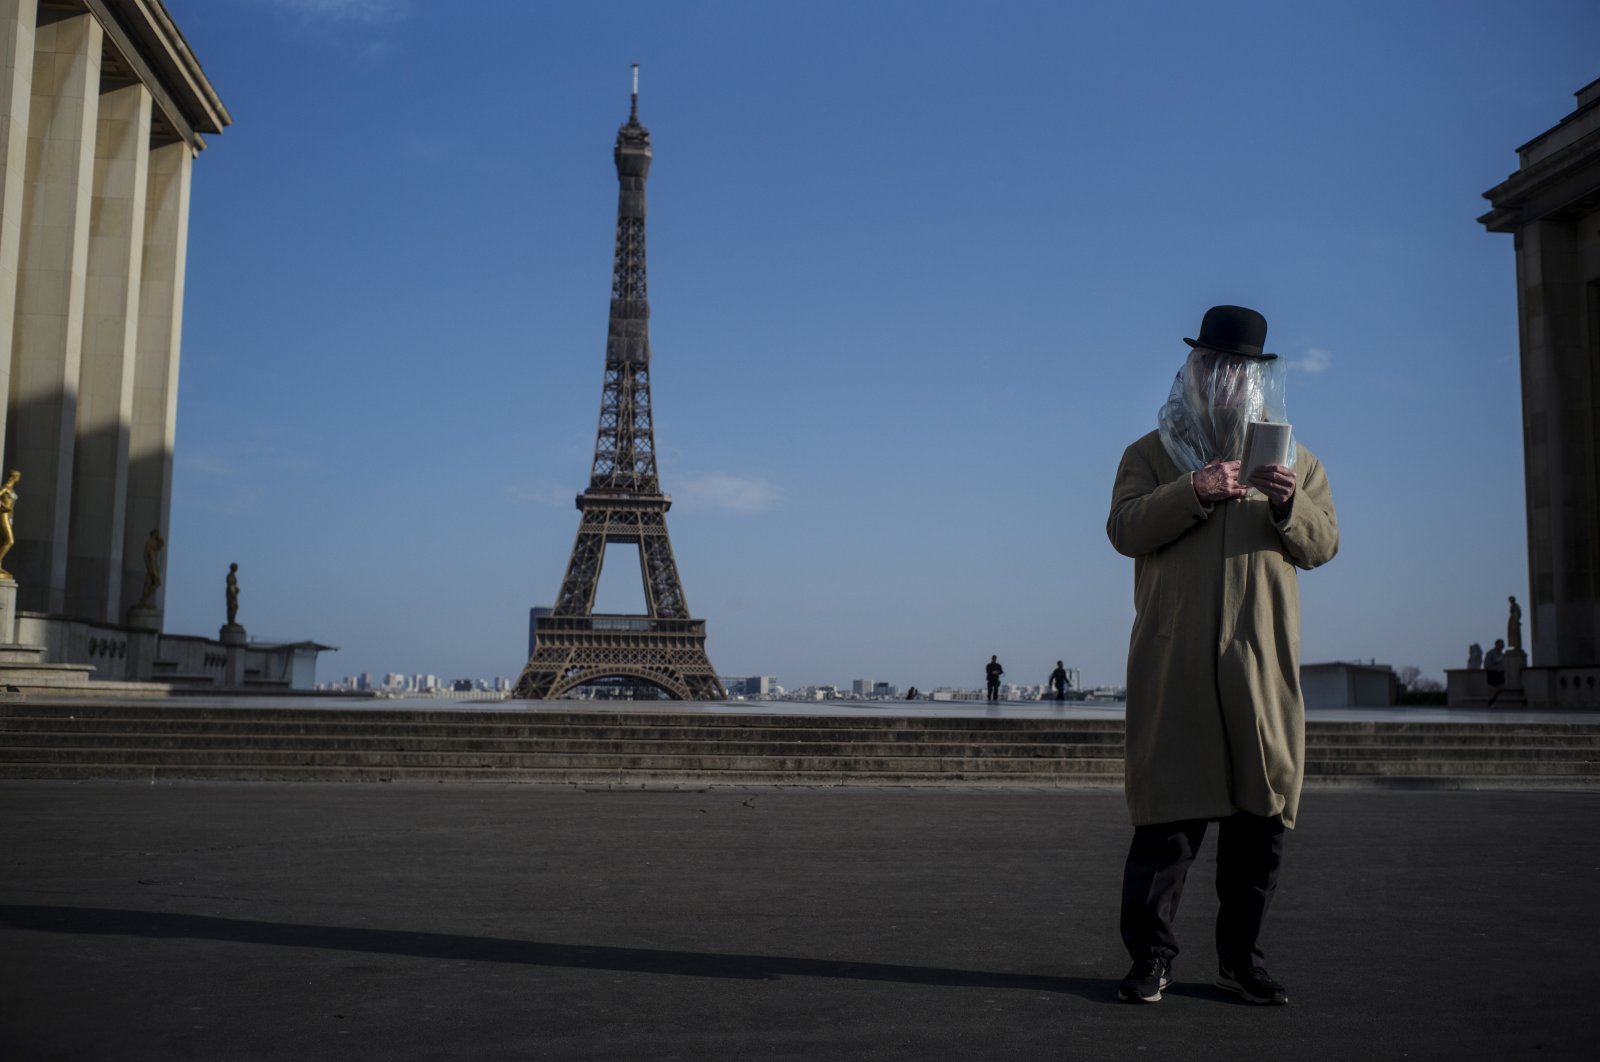 A man has his head covered with a plastic bag for protection reads a book in front of the Eiffel tower in Paris, France, 22 March 2020. (EPA Photo)